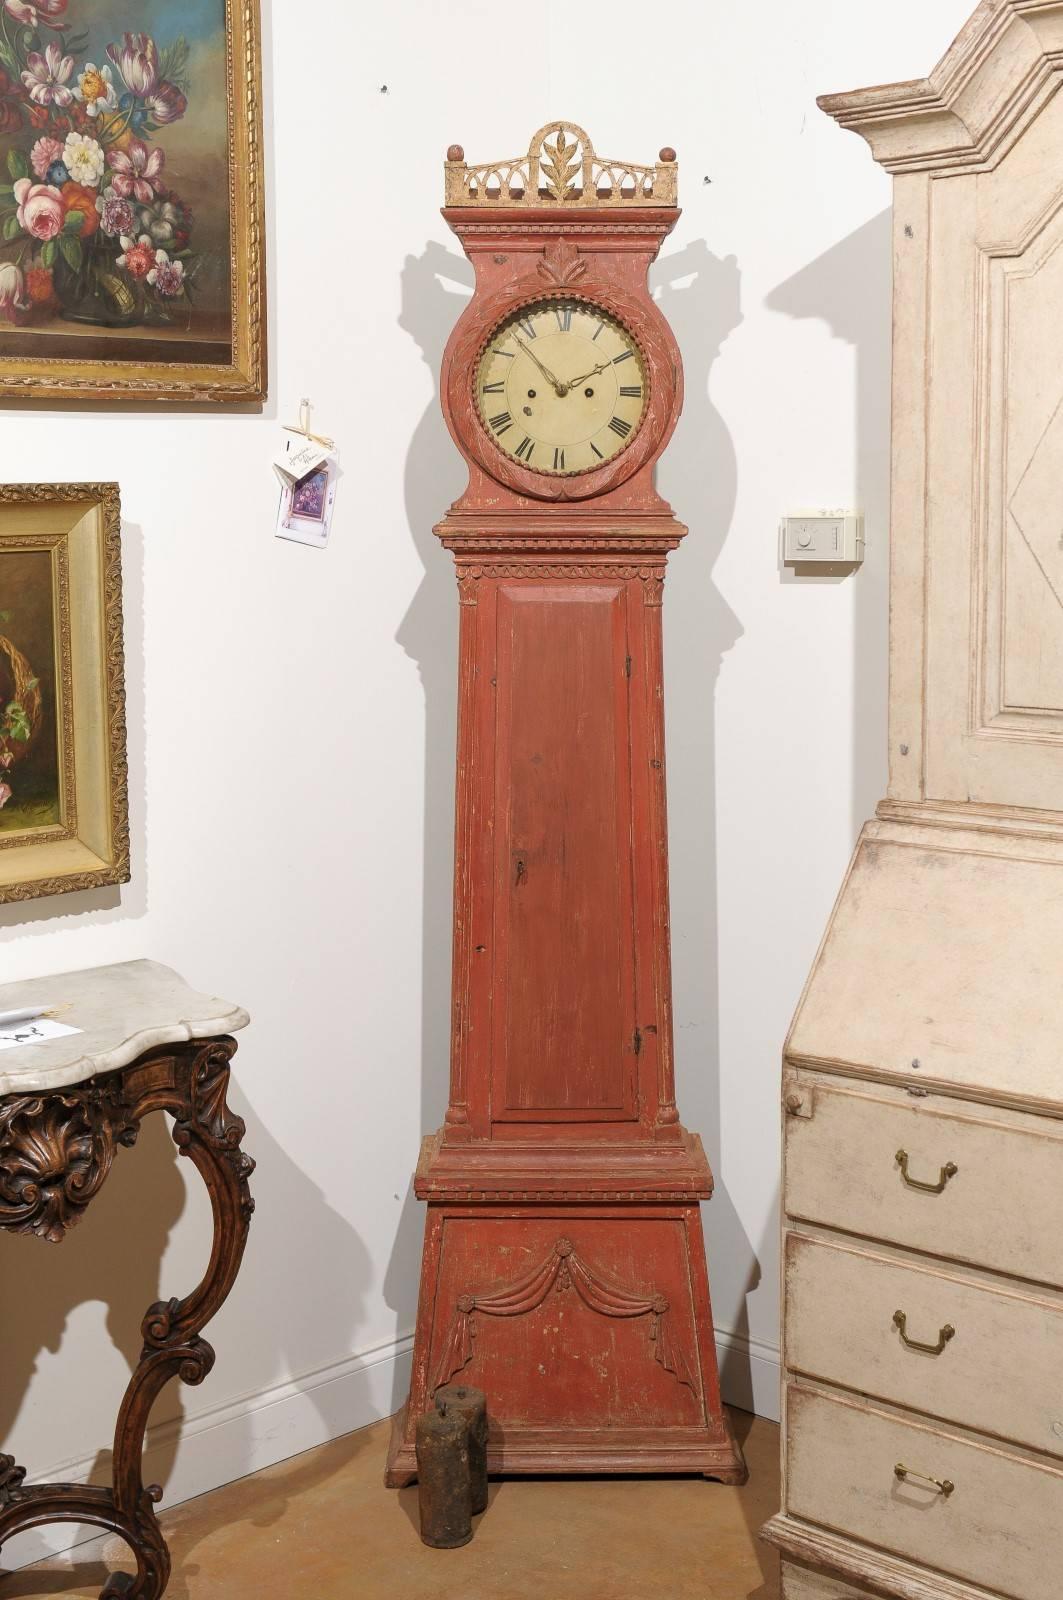 A Swedish Neoclassical tall case clock from the early 19th century with original orange paint and mechanisms. This Swedish longcase painted clock (commonly referred as a Mora clock) features an exquisite carved crest with pierced arched motifs